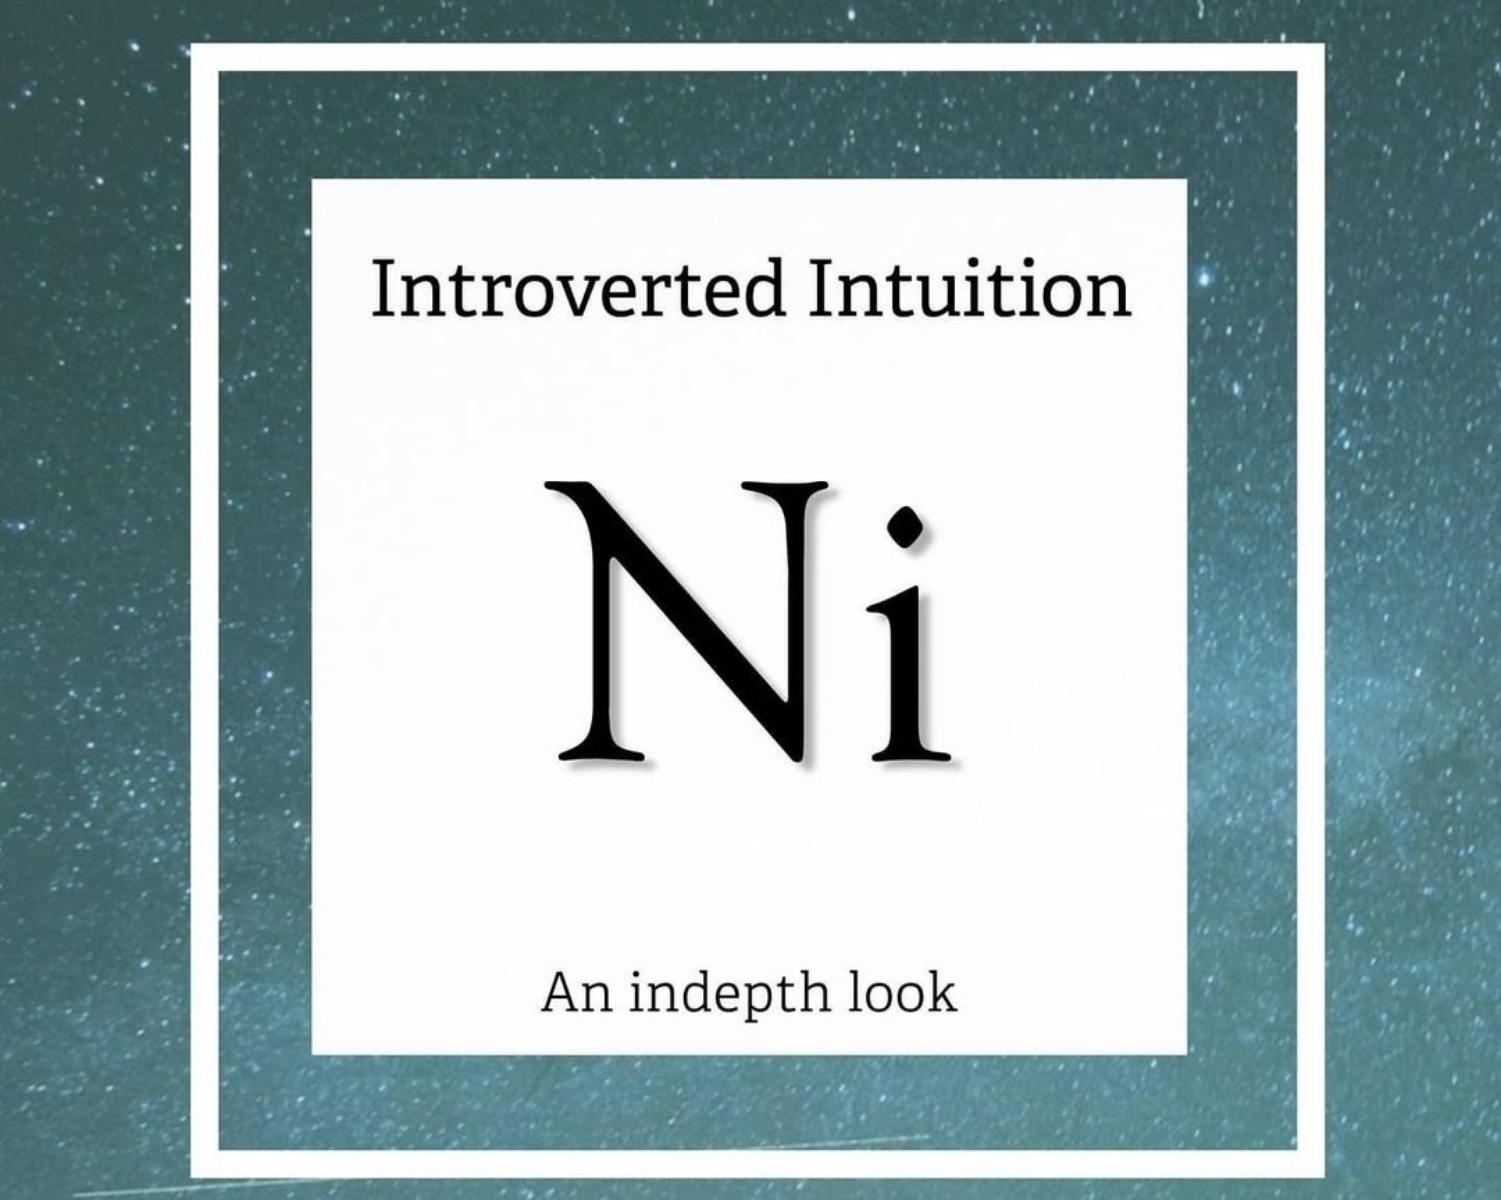 The Driver Process: Introverted Intuition (Ni) - "Perspective"